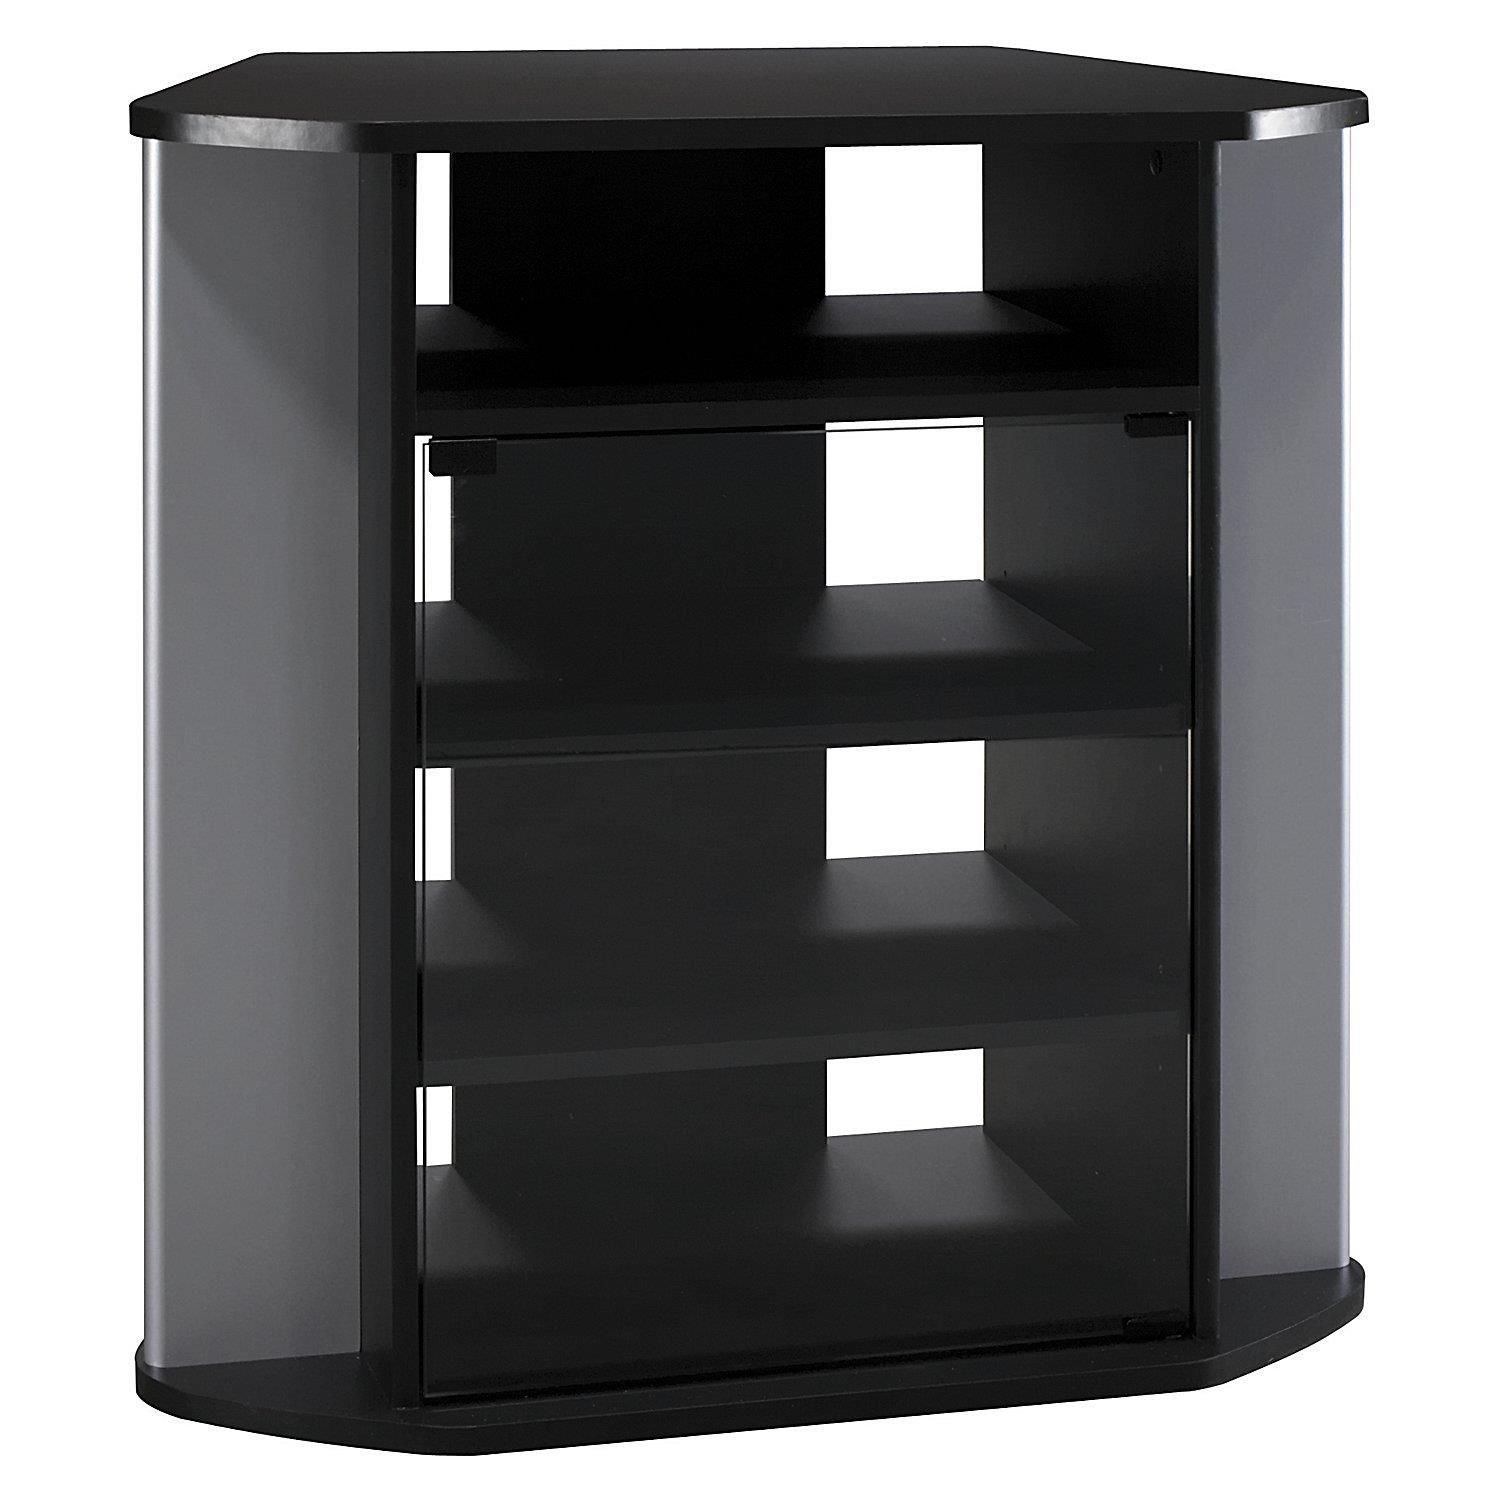 Tall Corner Tv Stand | Ojcommerce In Tall Skinny Tv Stands (View 8 of 15)